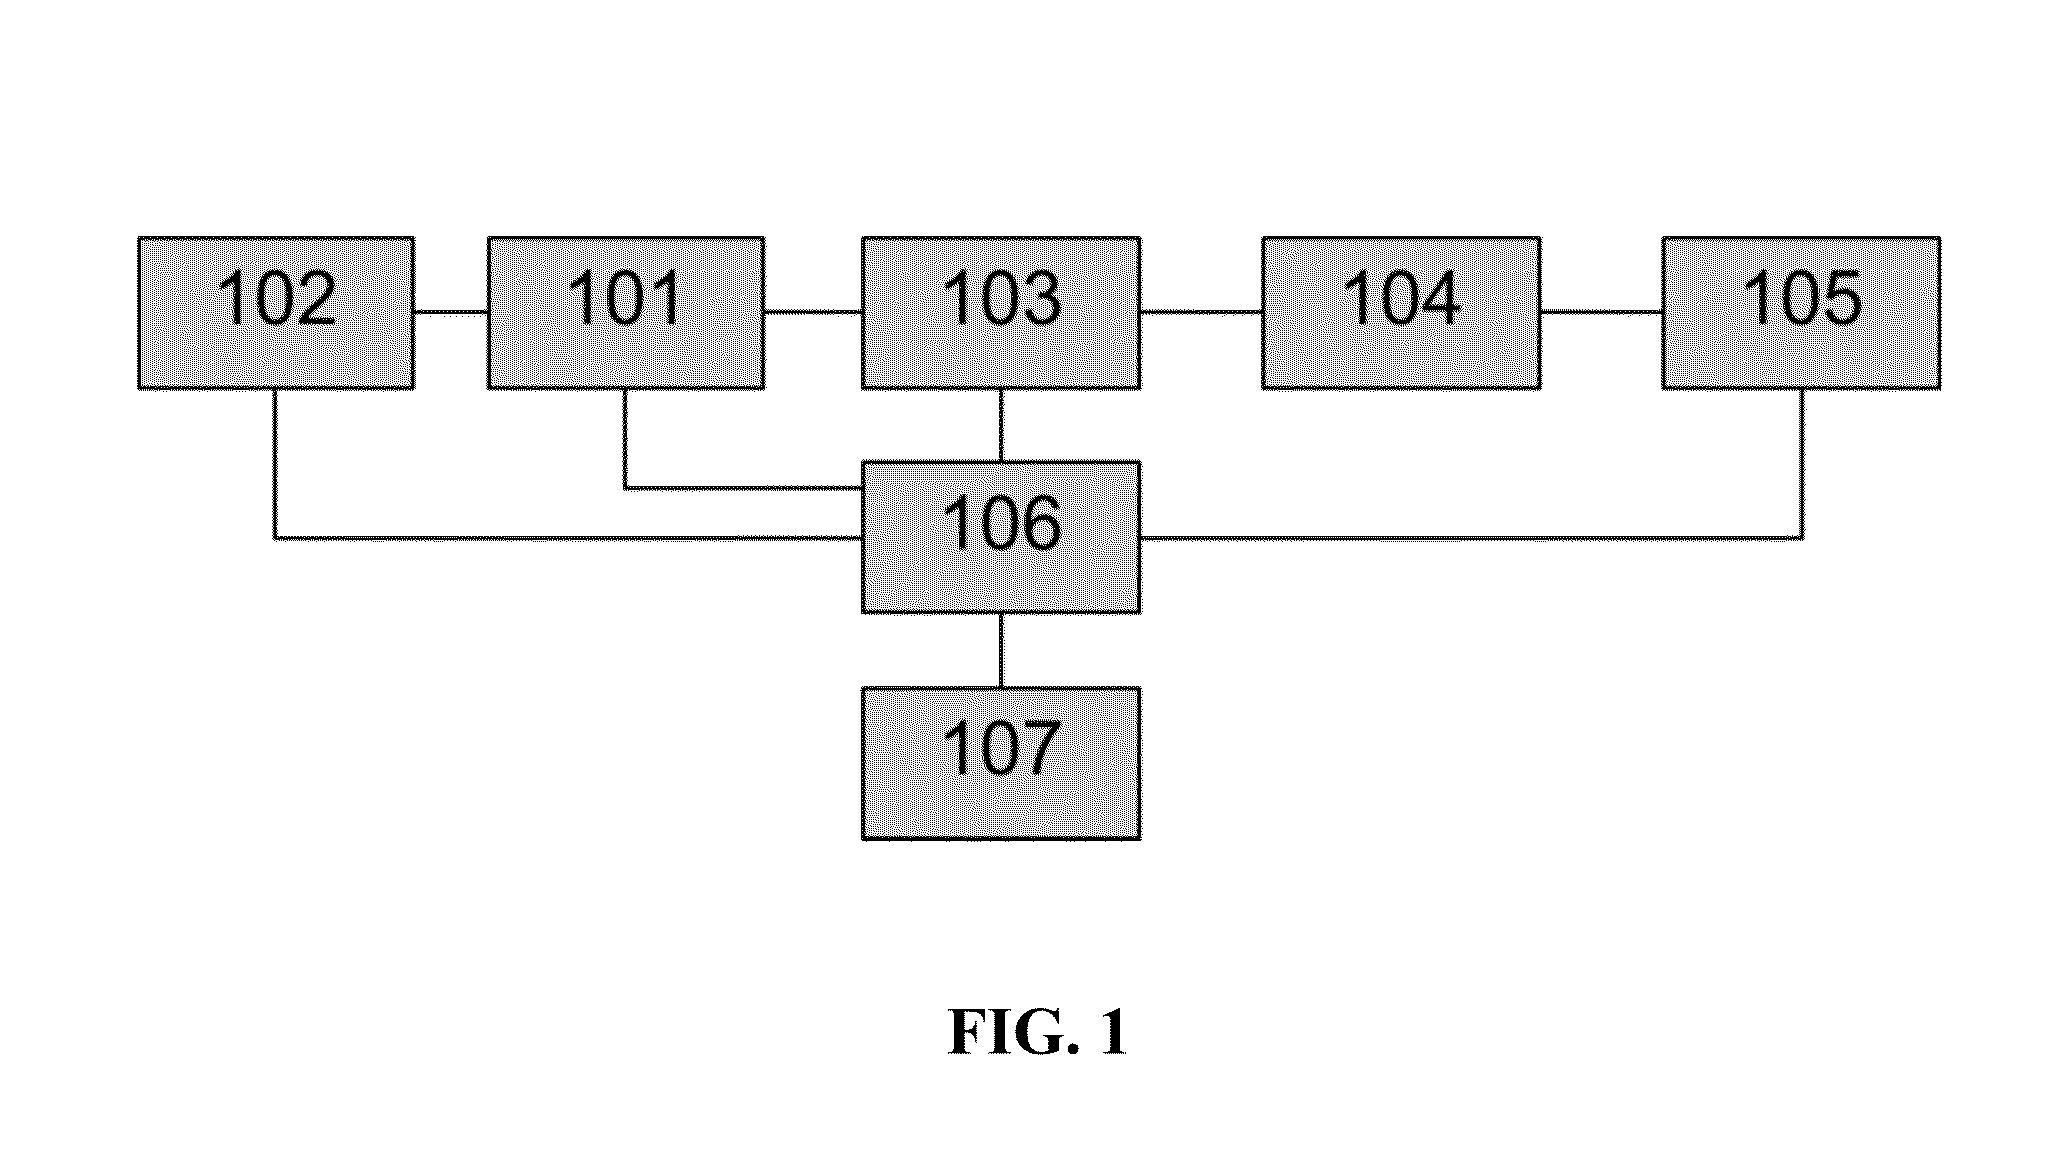 Displacement monitoring system having vibration cancellation capabilities